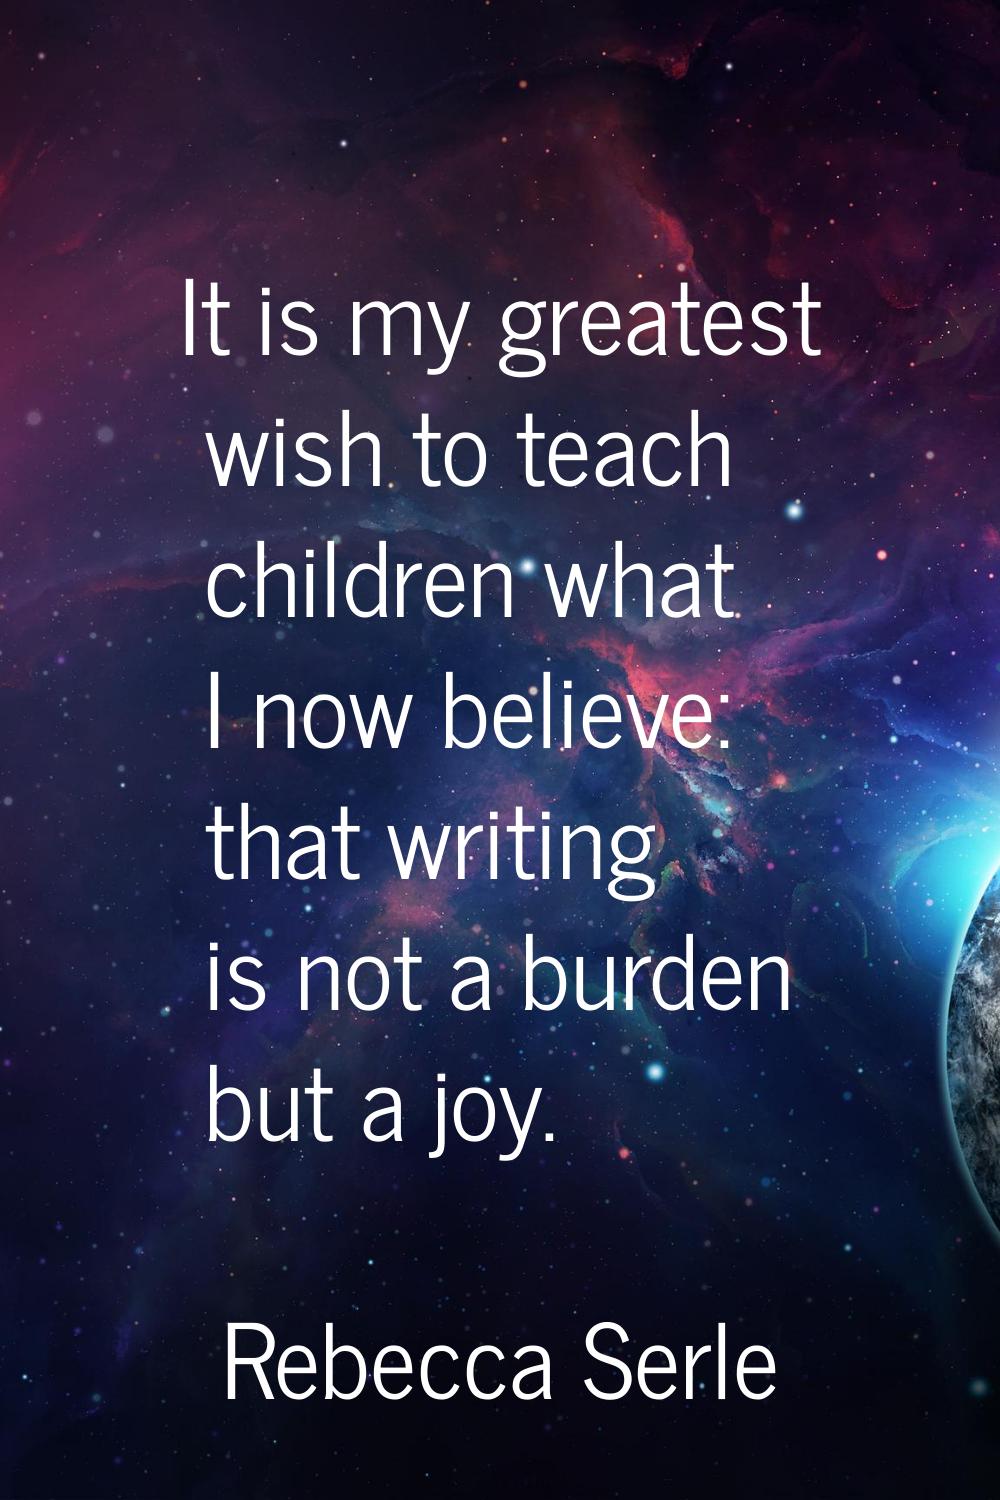 It is my greatest wish to teach children what I now believe: that writing is not a burden but a joy